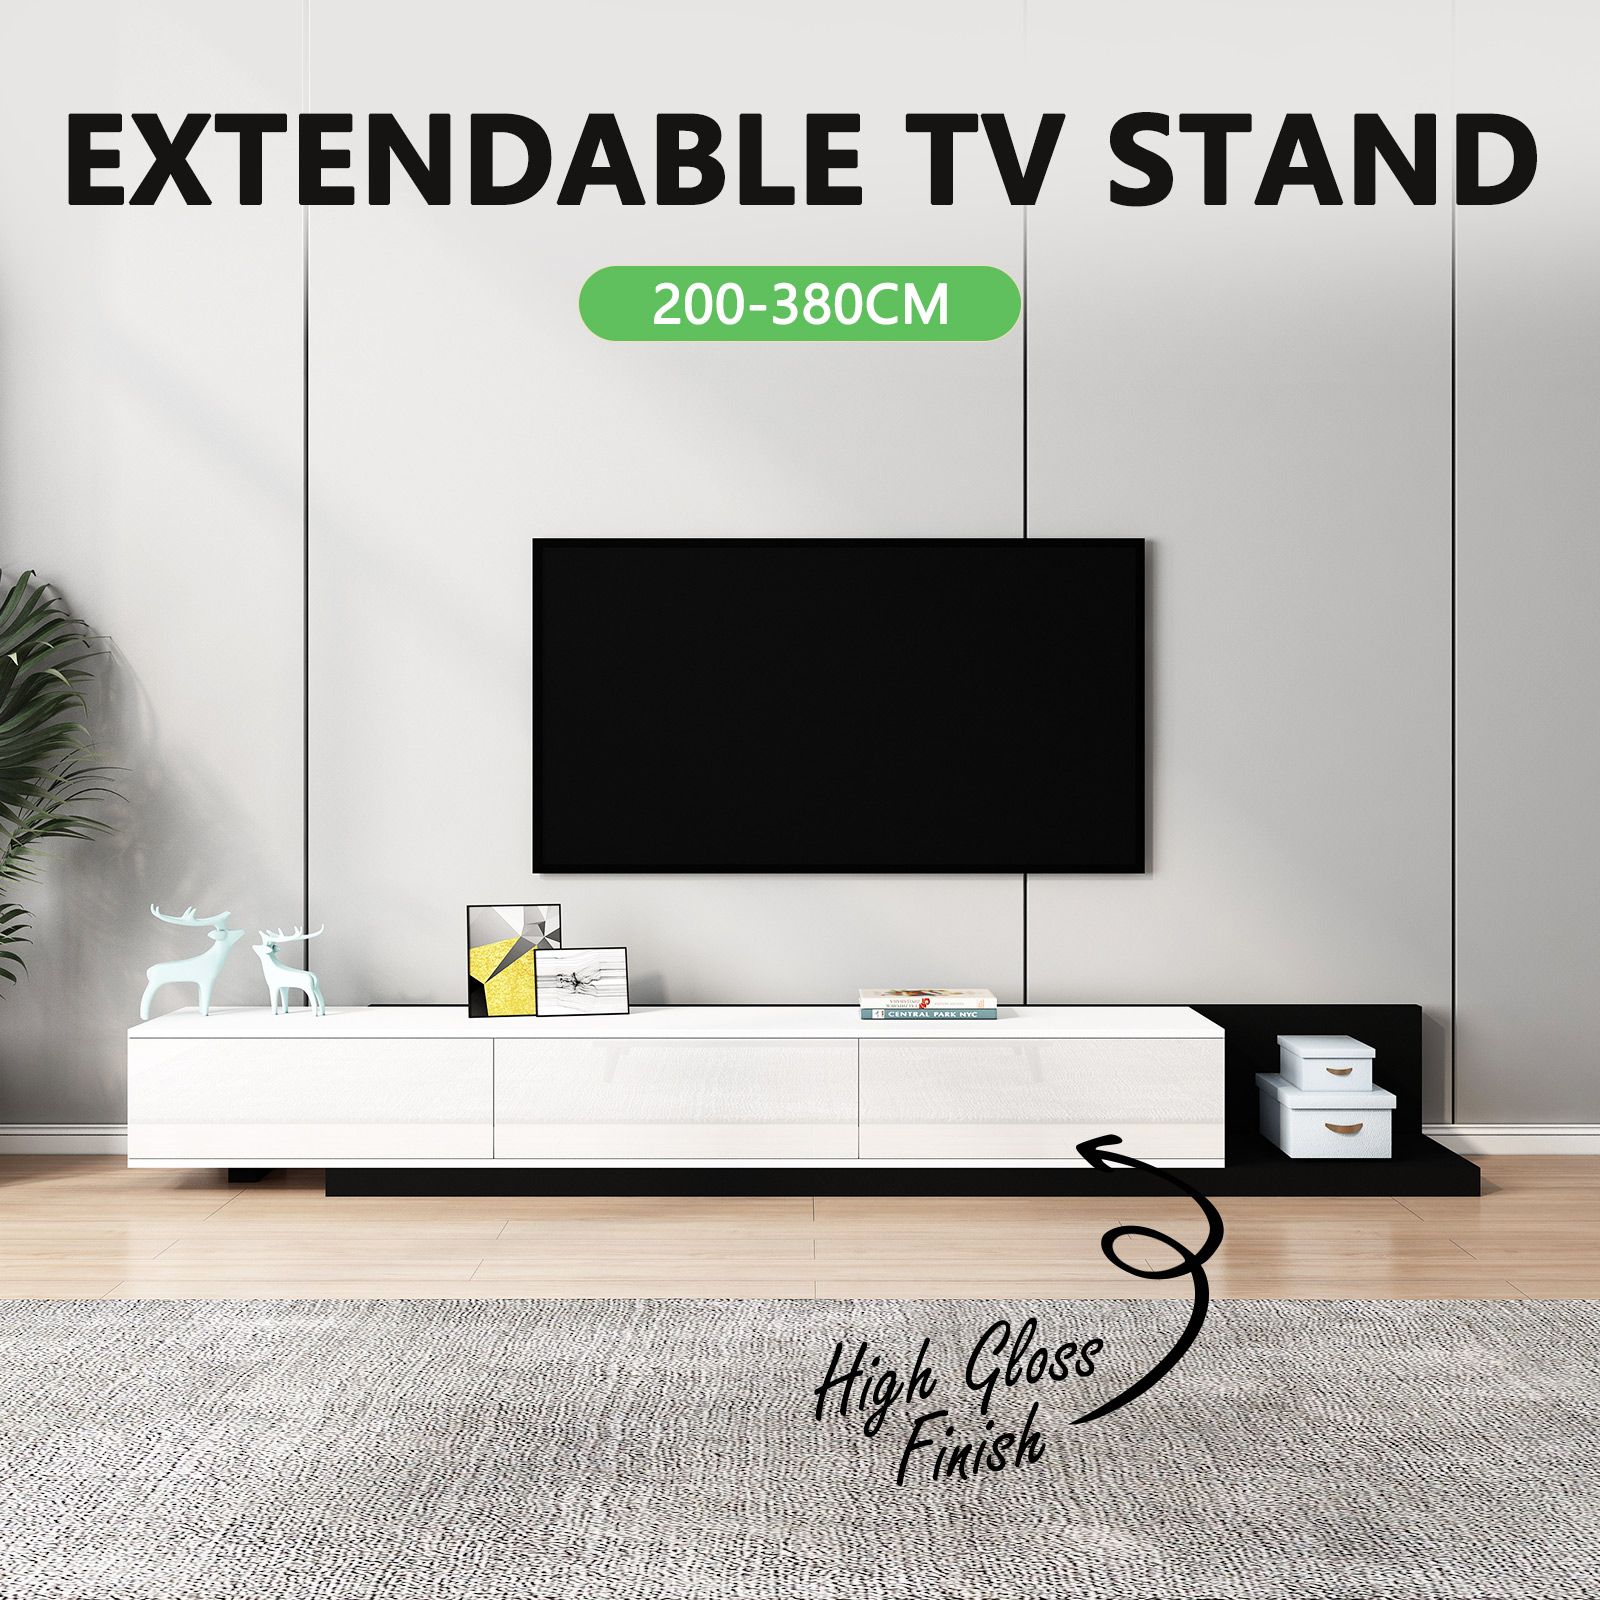 TV Stand Unit Cabinet Extendable Console Entertainment Centre Table Side Storage Living Room Furniture